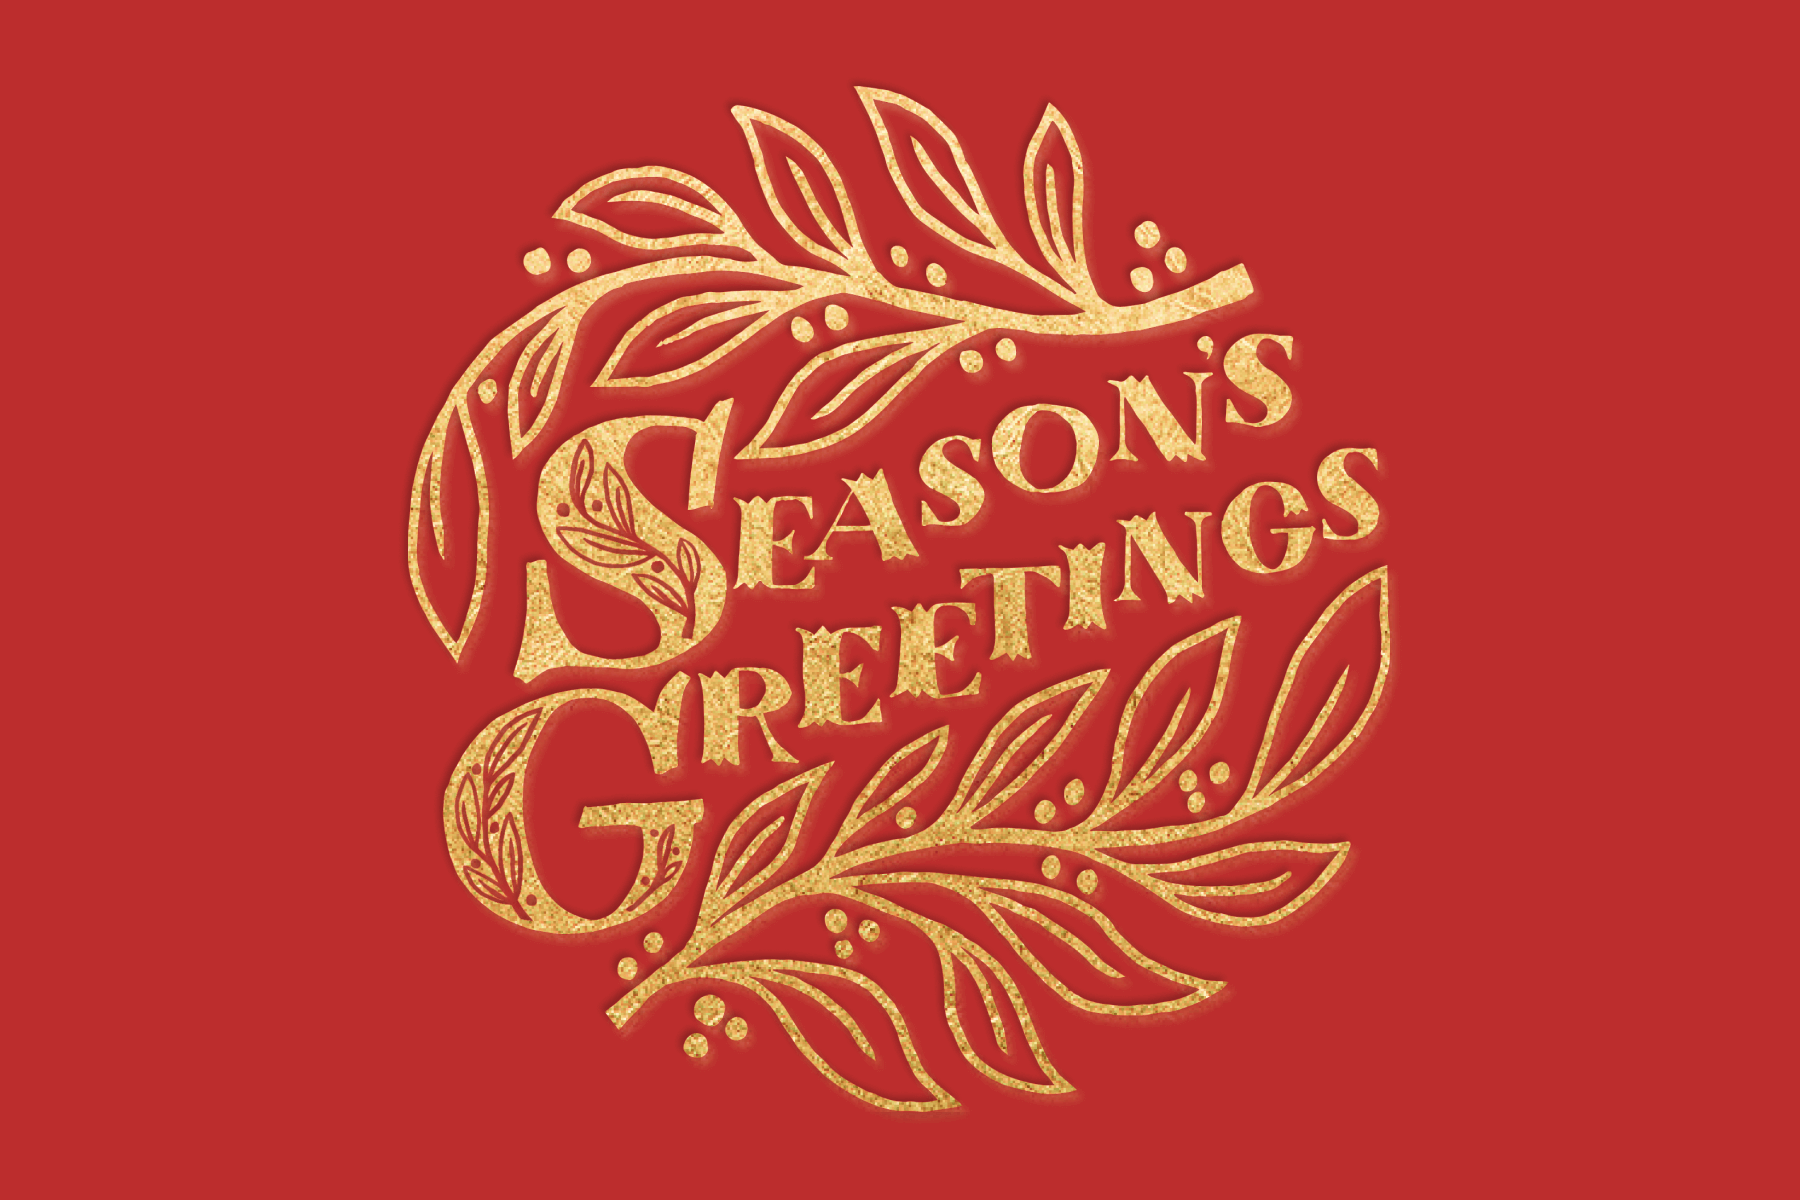 The phrase “season’s greetings” in gold surrounded by branches on a red background.